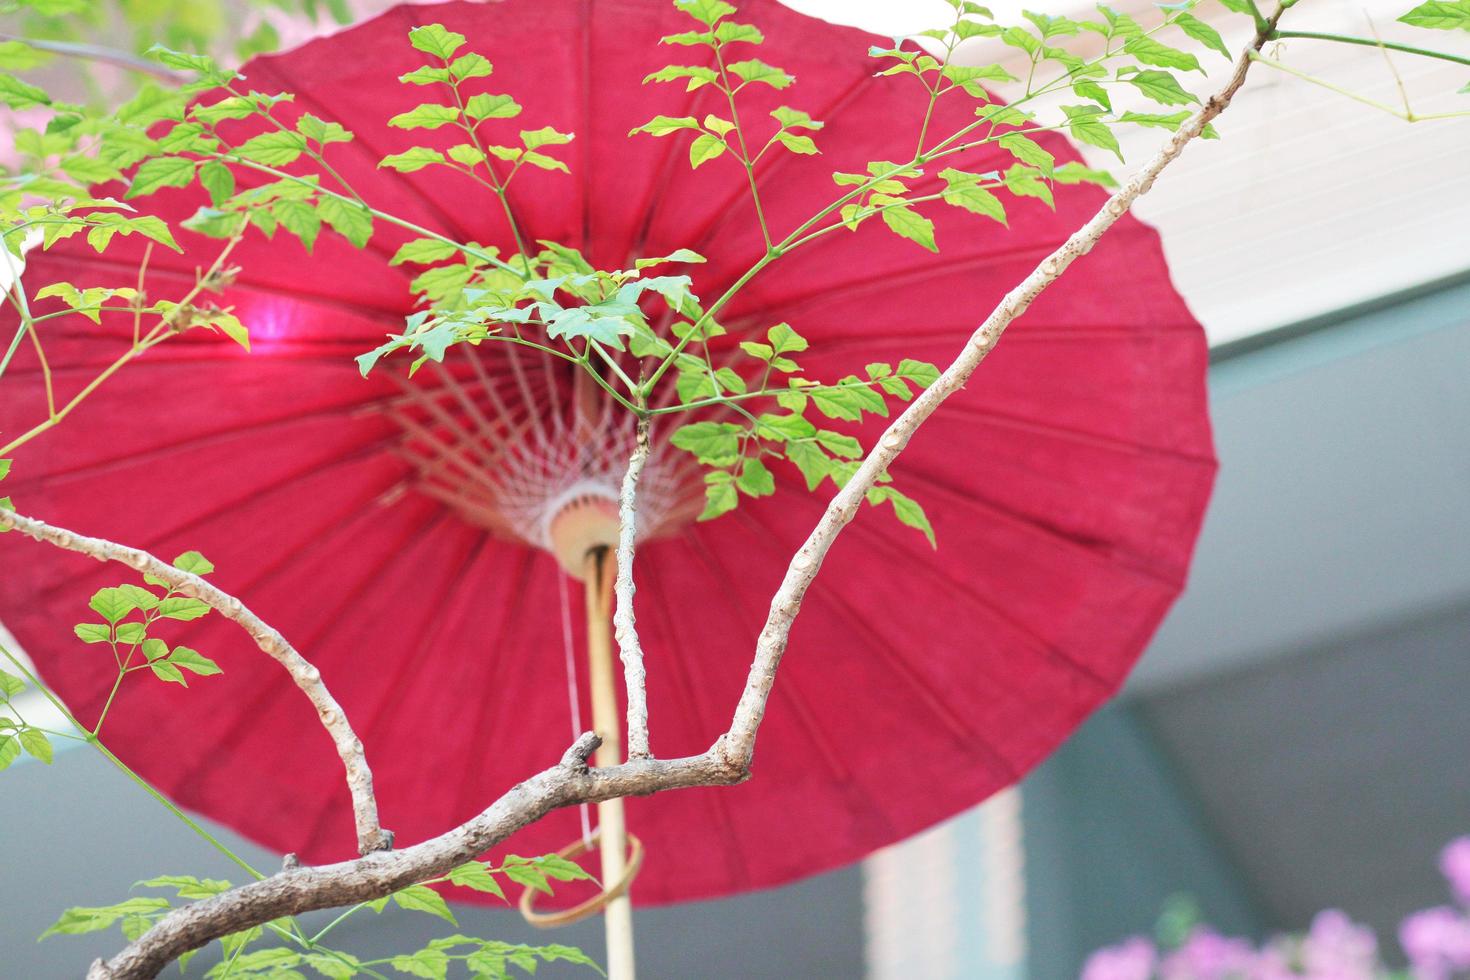 Handmade ancient umbrella in the north of Thailand, Lanna umbrella made from paper decorate in garden. photo